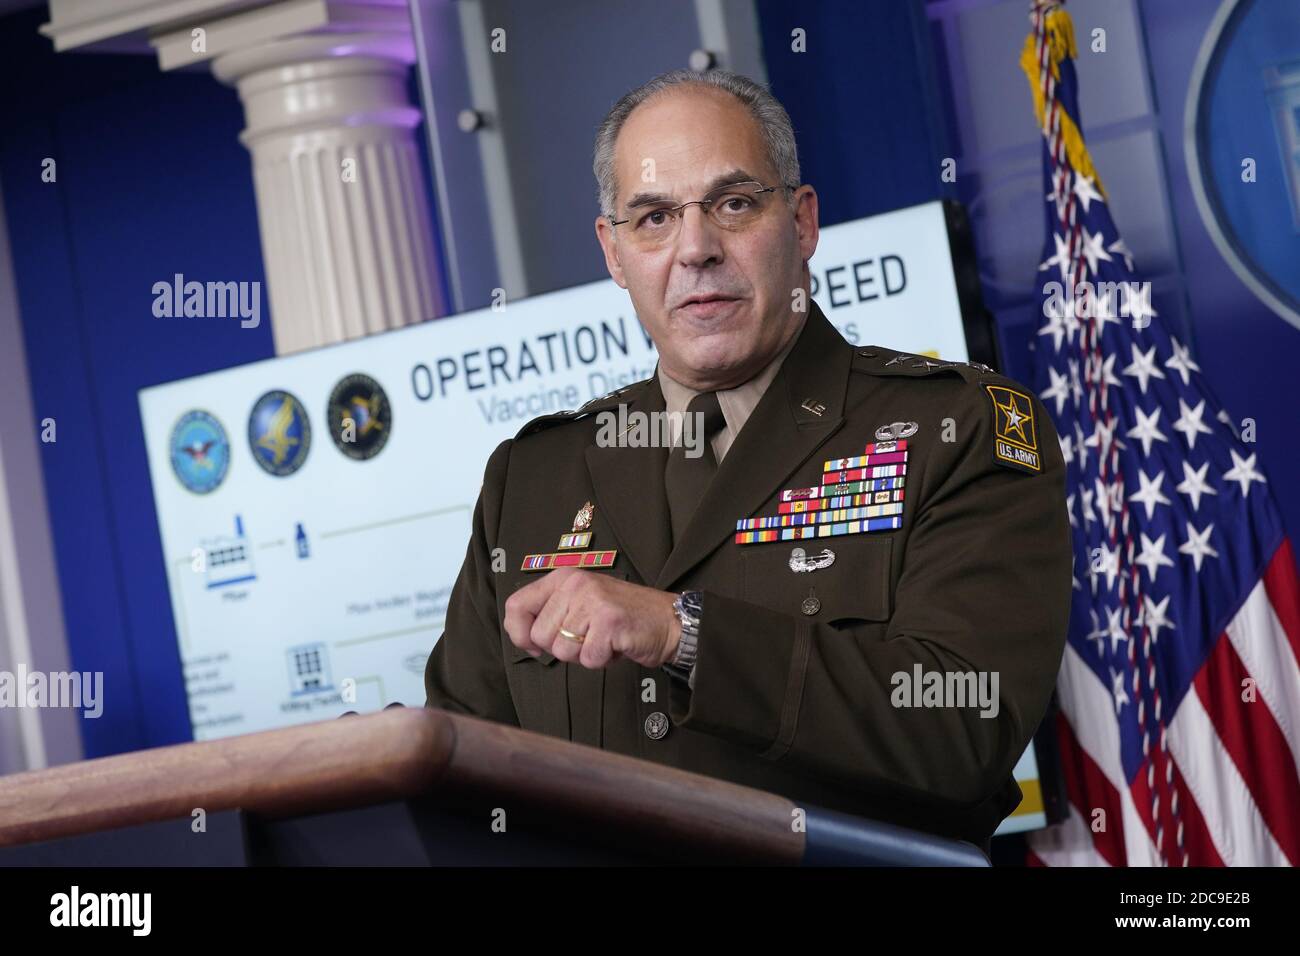 Washington, United States. 19th Nov, 2020. United States Army General Gustave F. Perna, chief operating officer, Operation Warp Speed, participates in a briefing with members of the White House Coronavirus Task Force at the White House in Washington, DC, on November 19, 2020. Photo by Chris Kleponis/Pool Credit: UPI/Alamy Live News Stock Photo